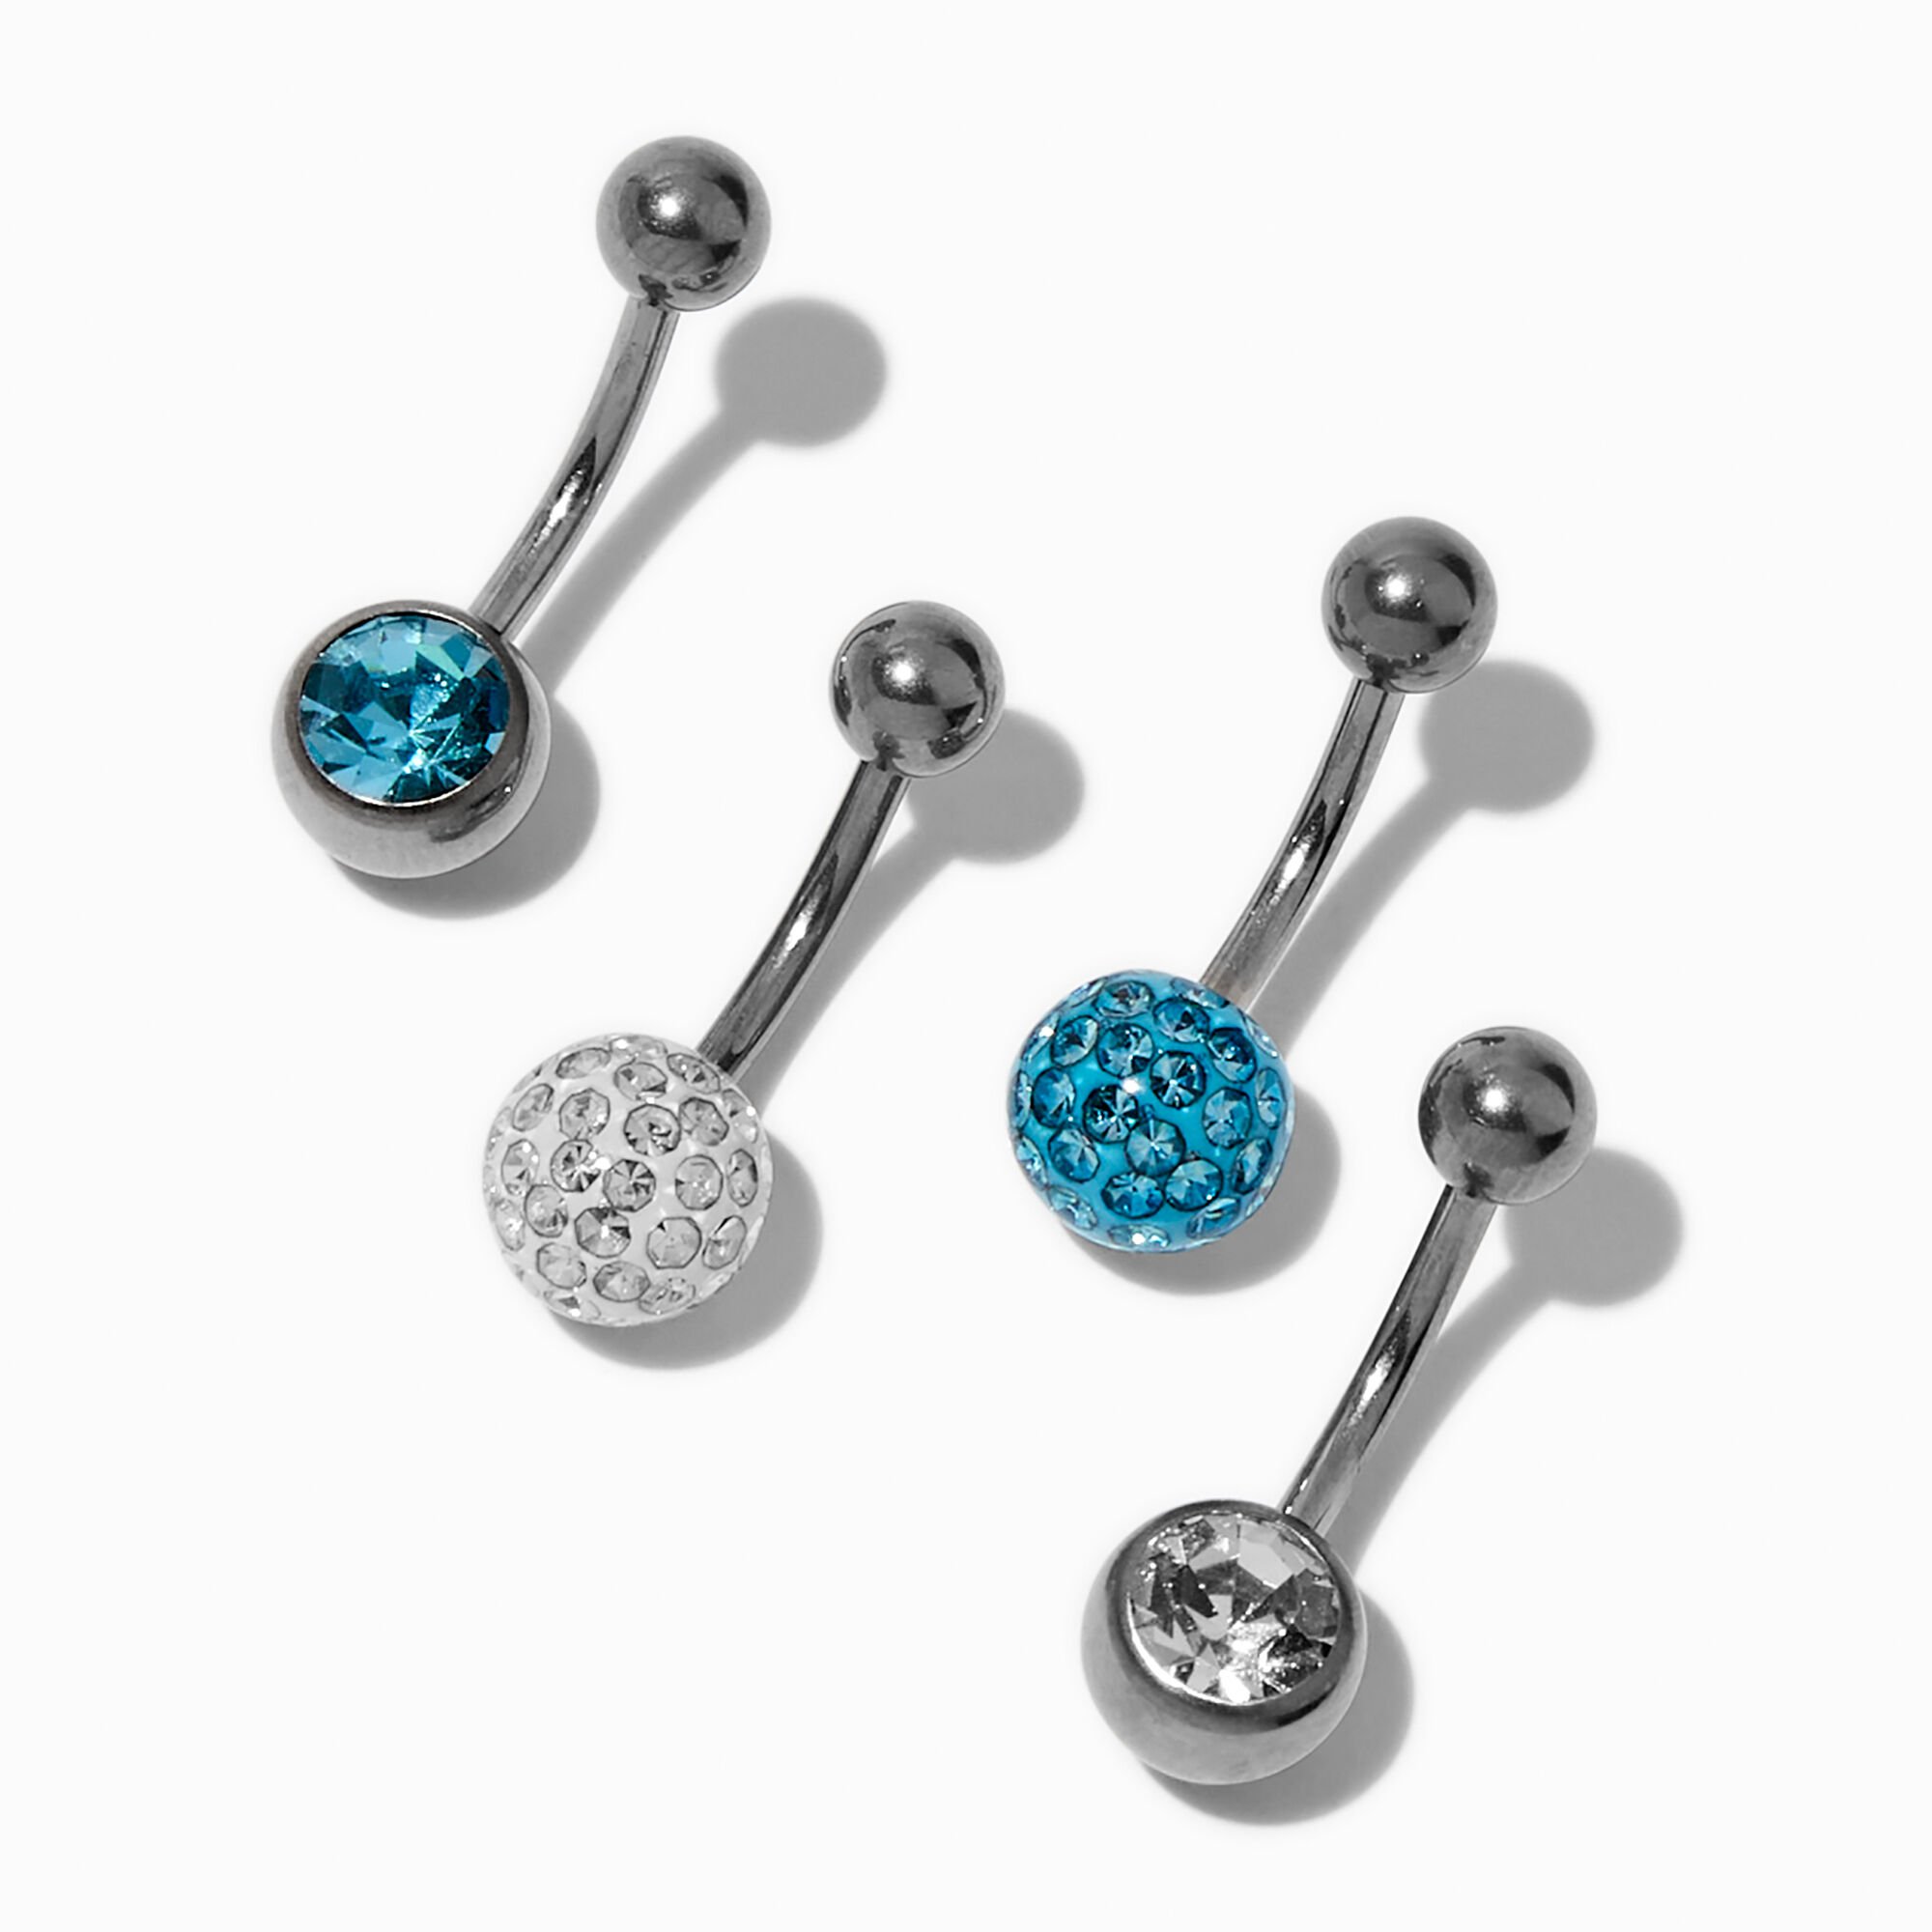 View Claires Tone Aqua Fireball 14G Belly Bars 4 Pack Silver information